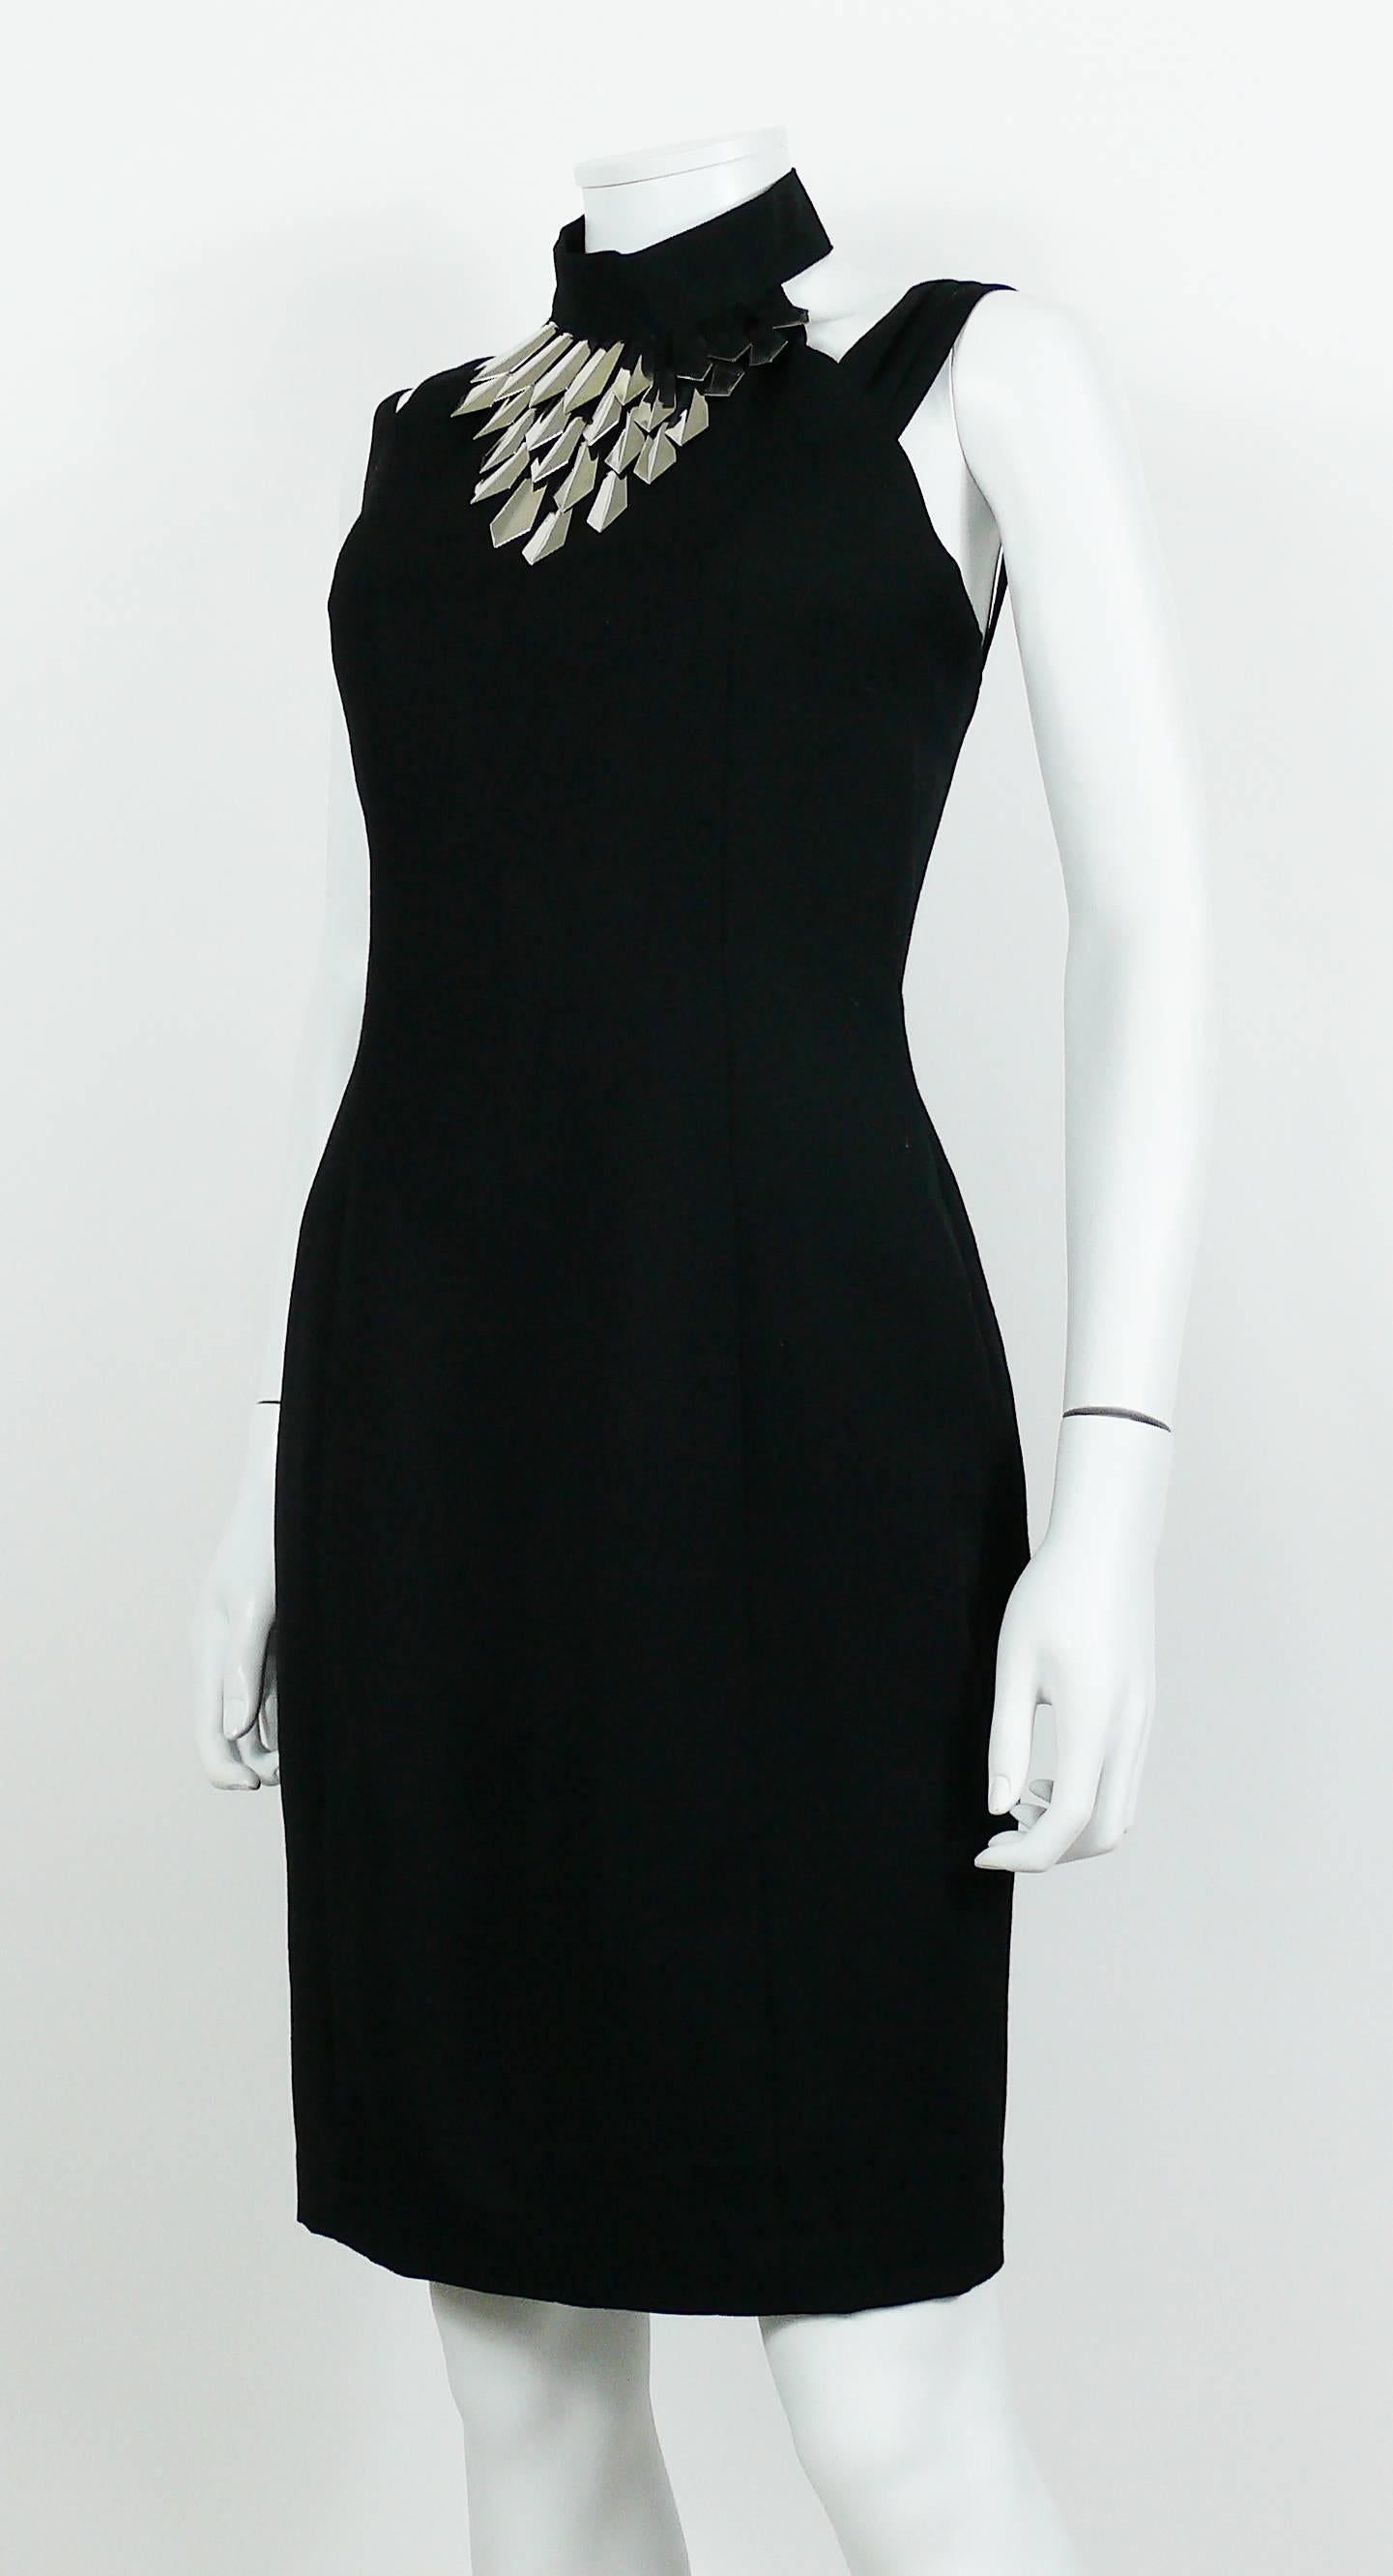 black dress with pearl collar